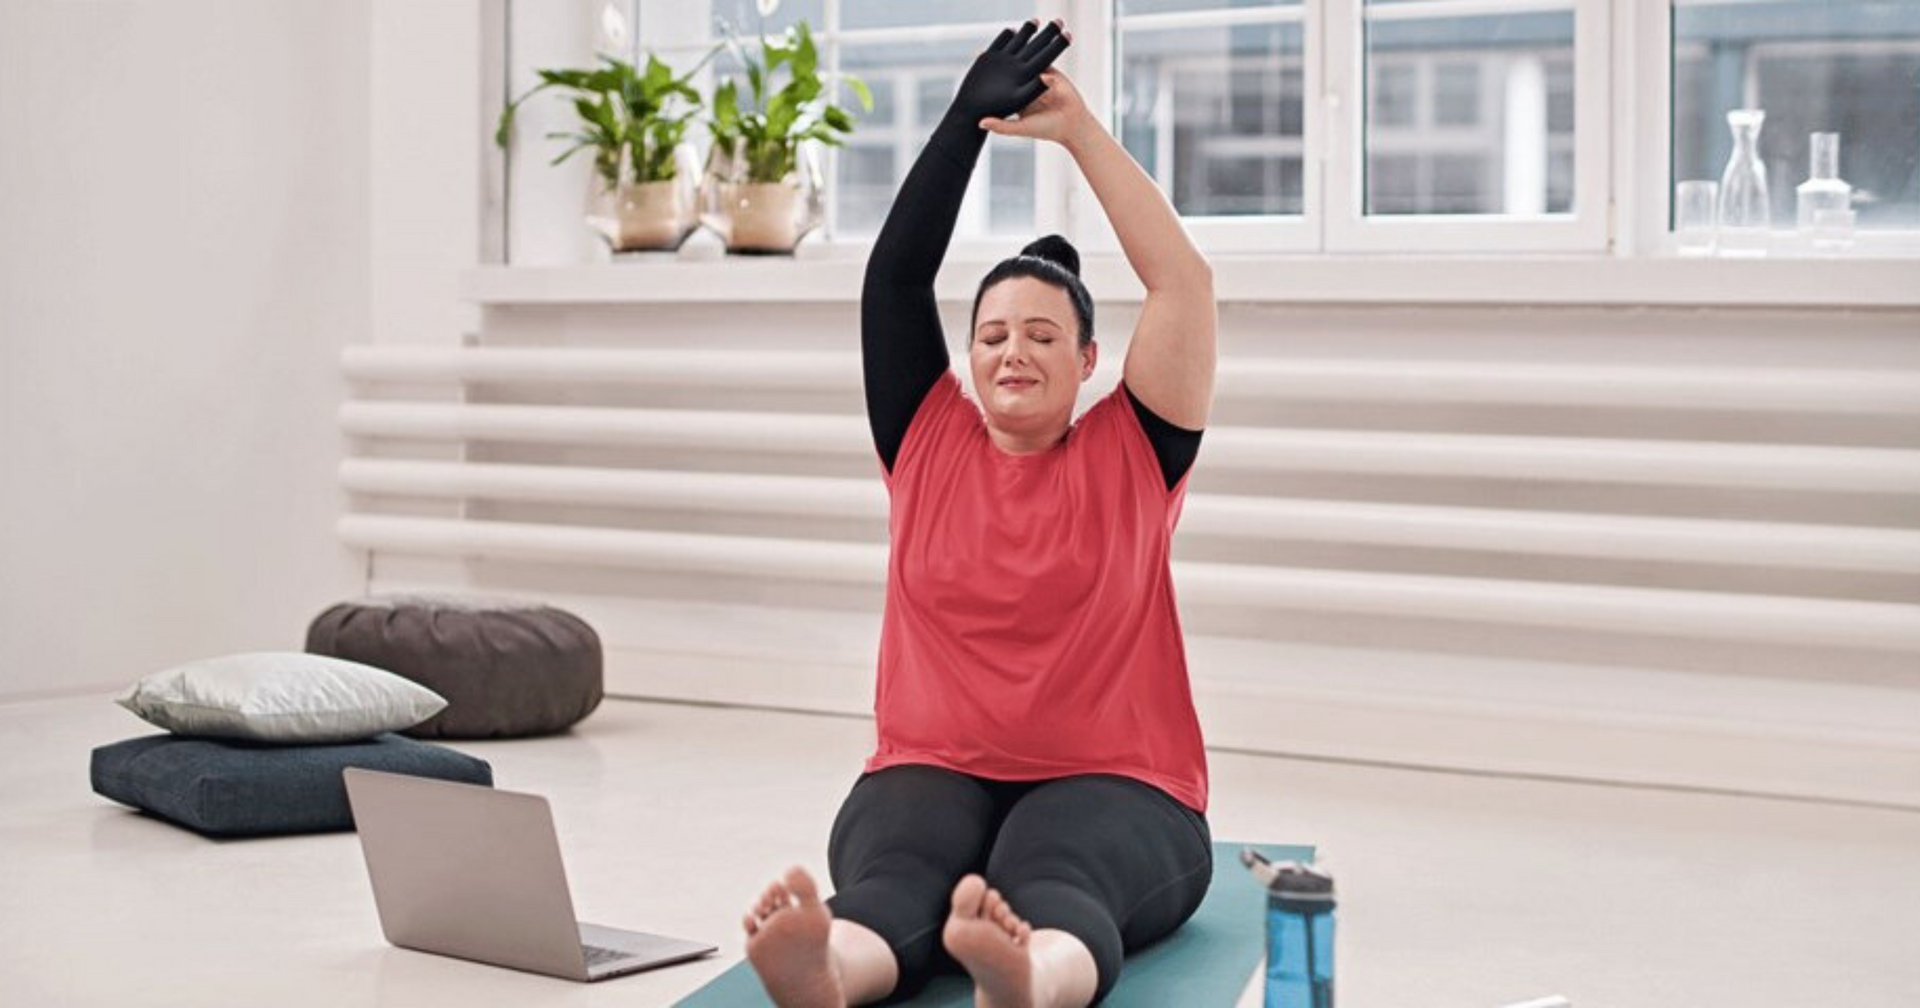 Fittings For You in Wichita, KS Empowers Exercising Safely with Lymphedema